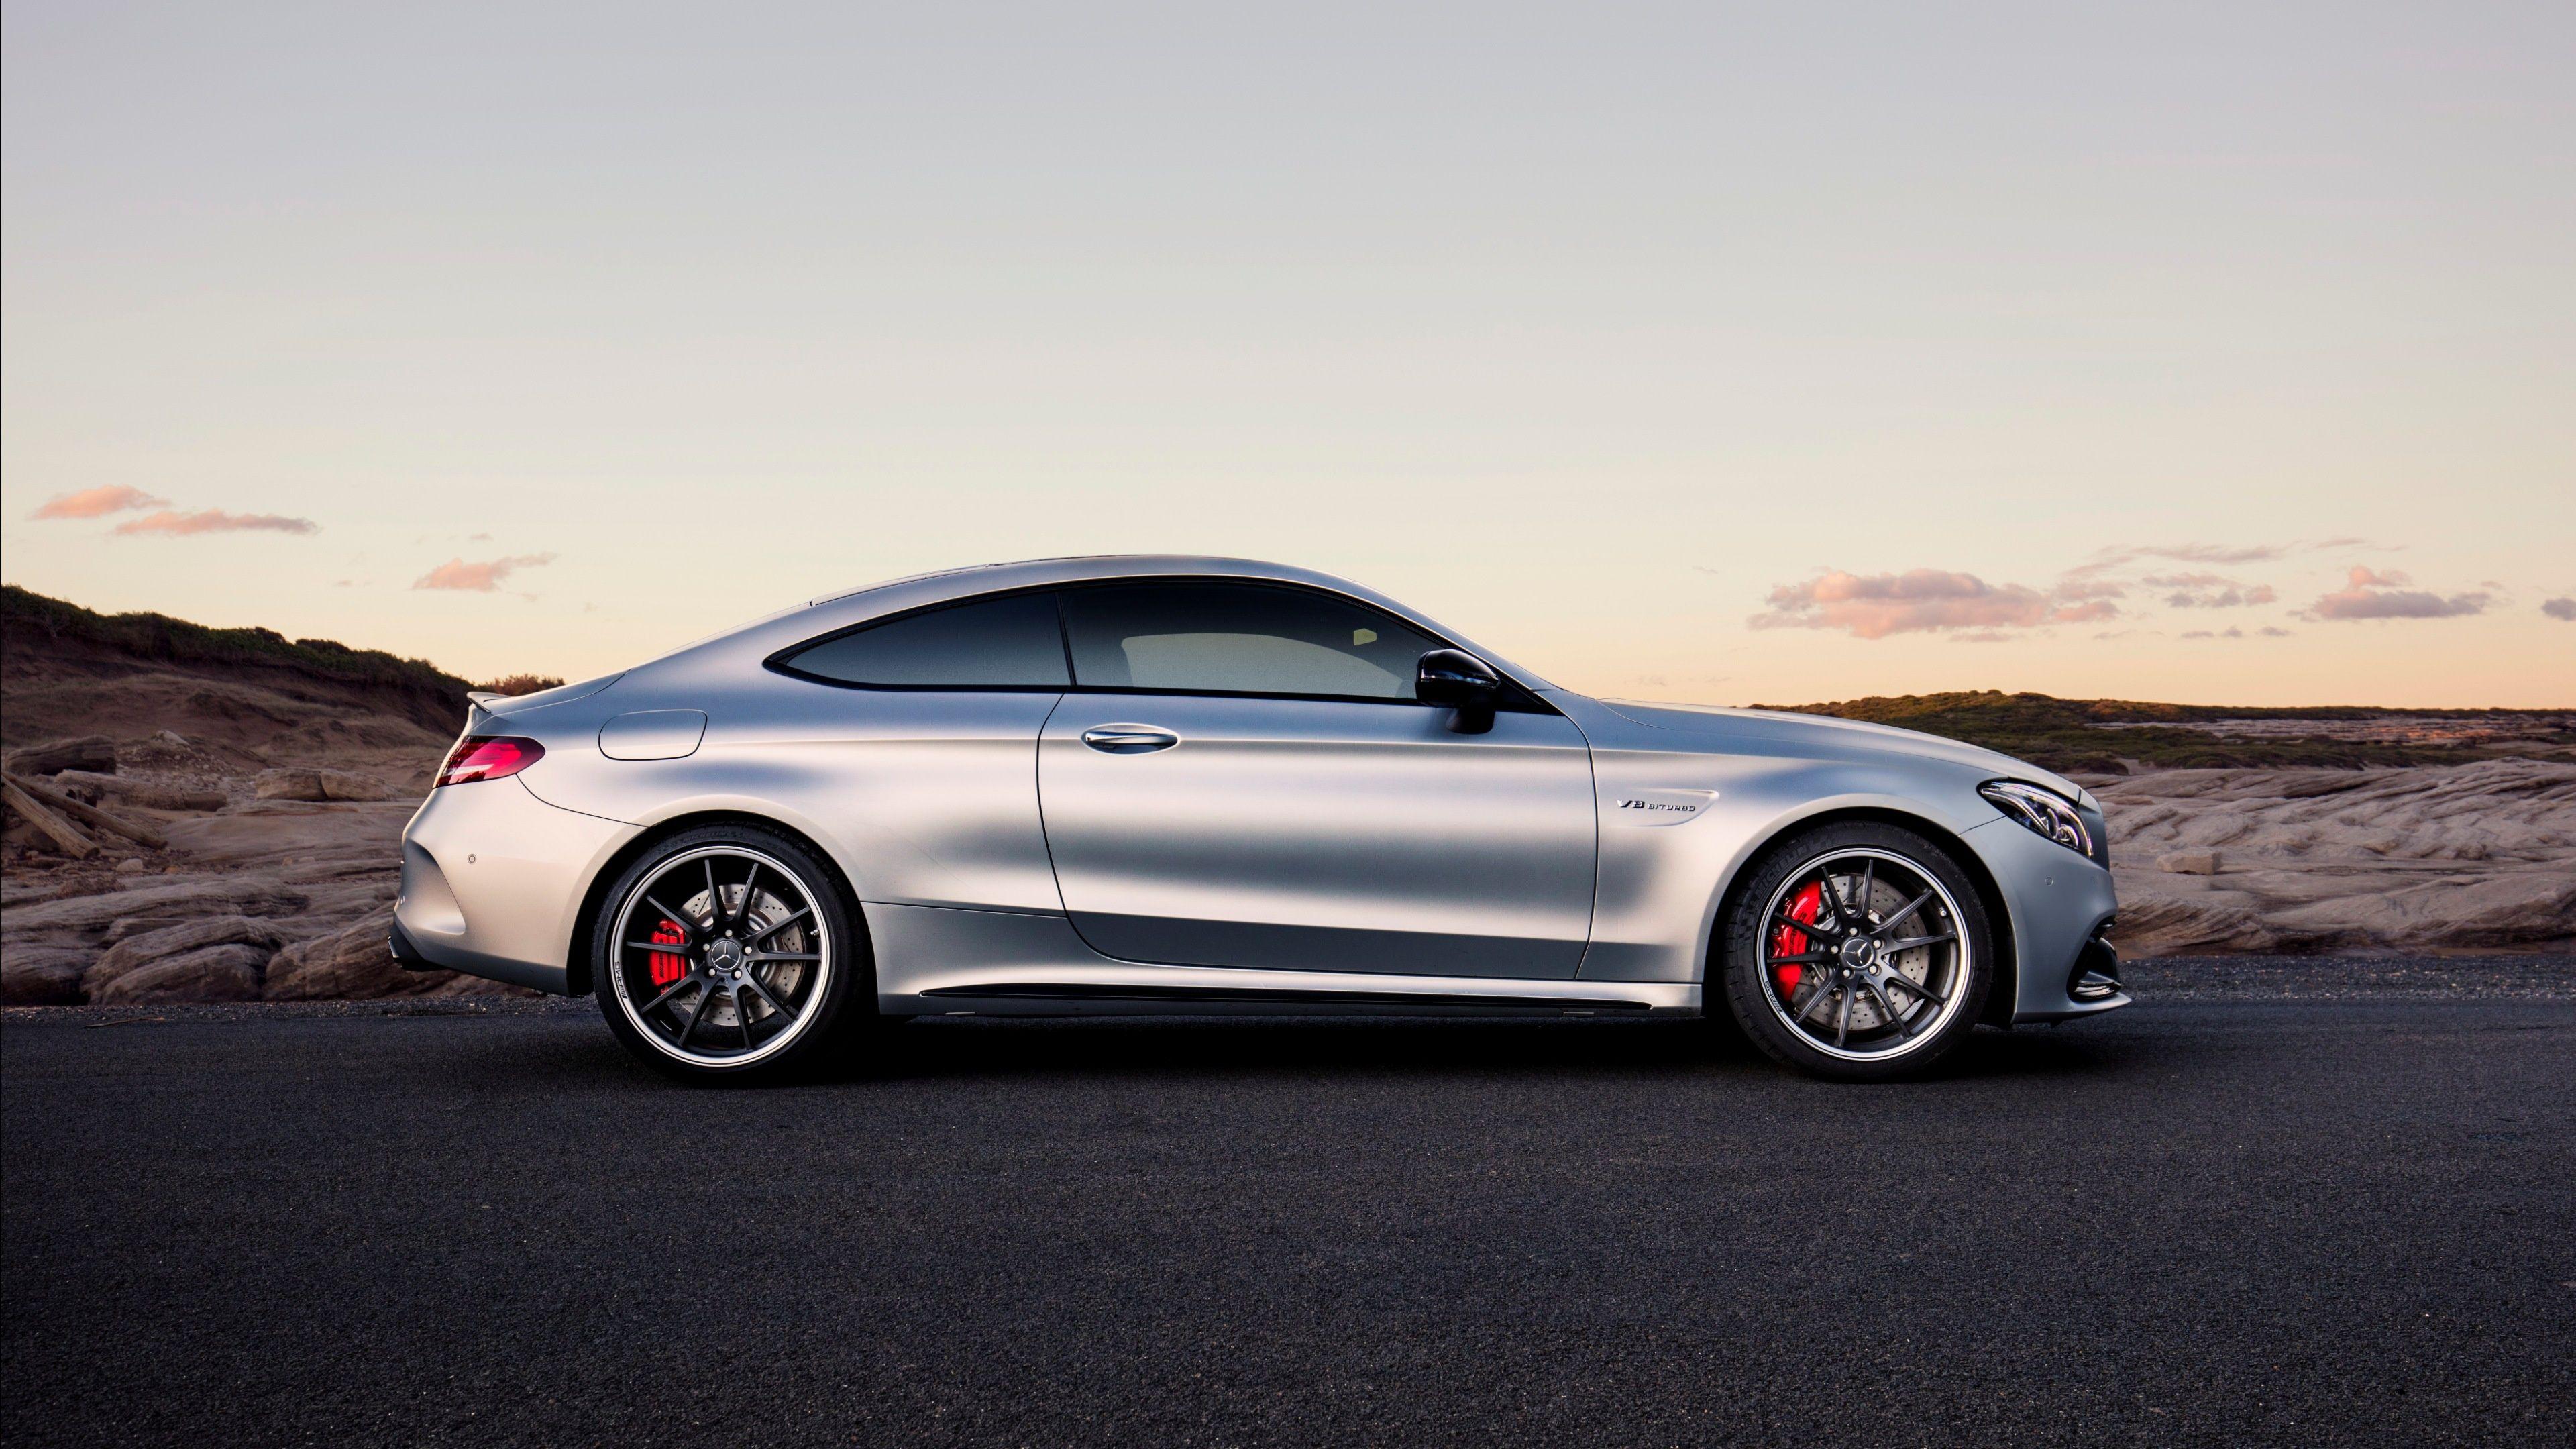 Mercedes AMG C63 S Coupe 2017 Wallpaper